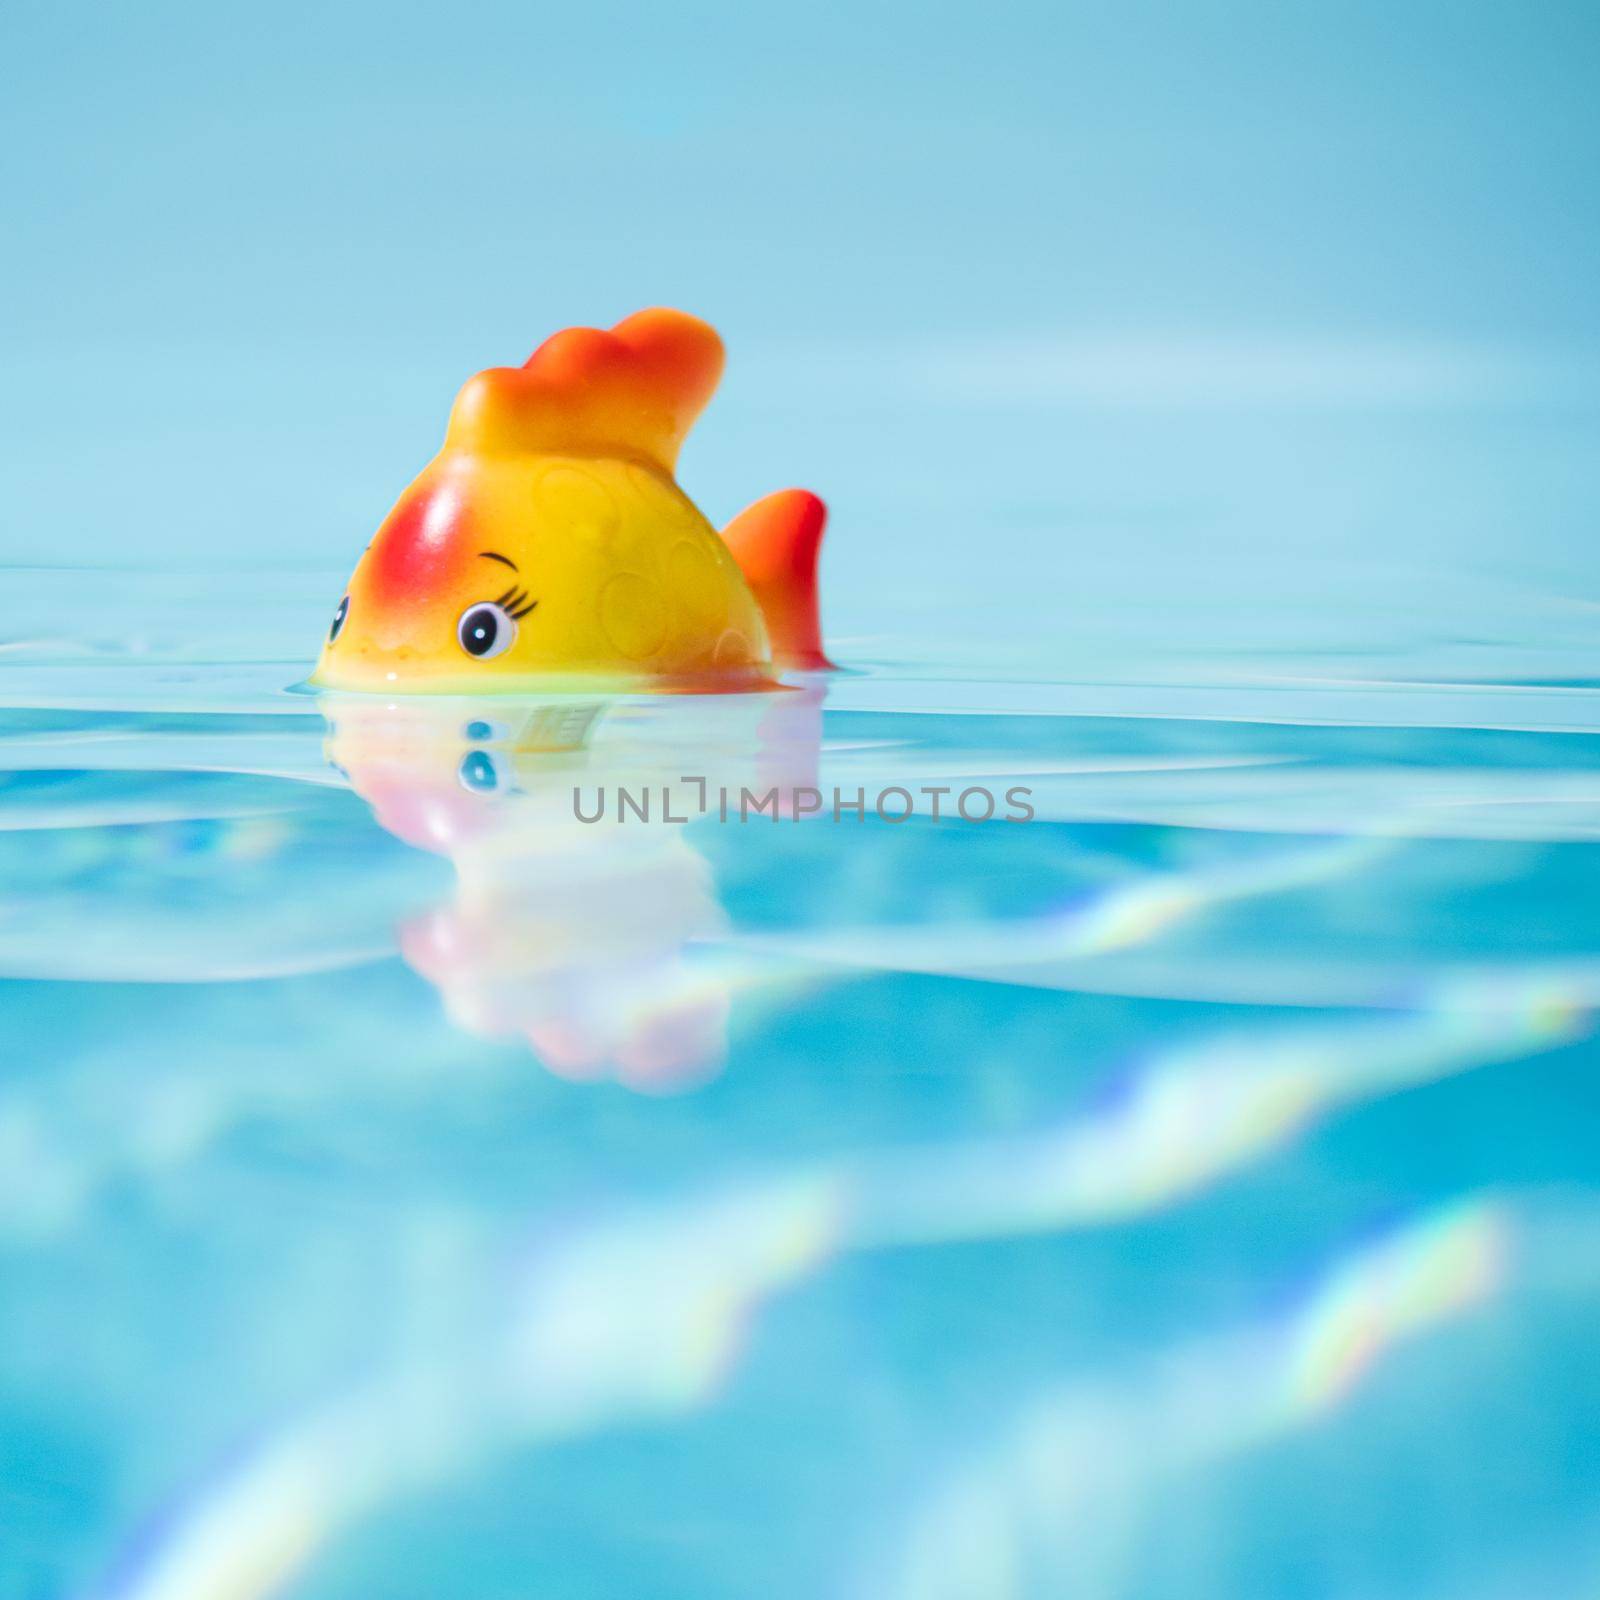 Toy fish taking bath in swimming pool, shallow depth of field